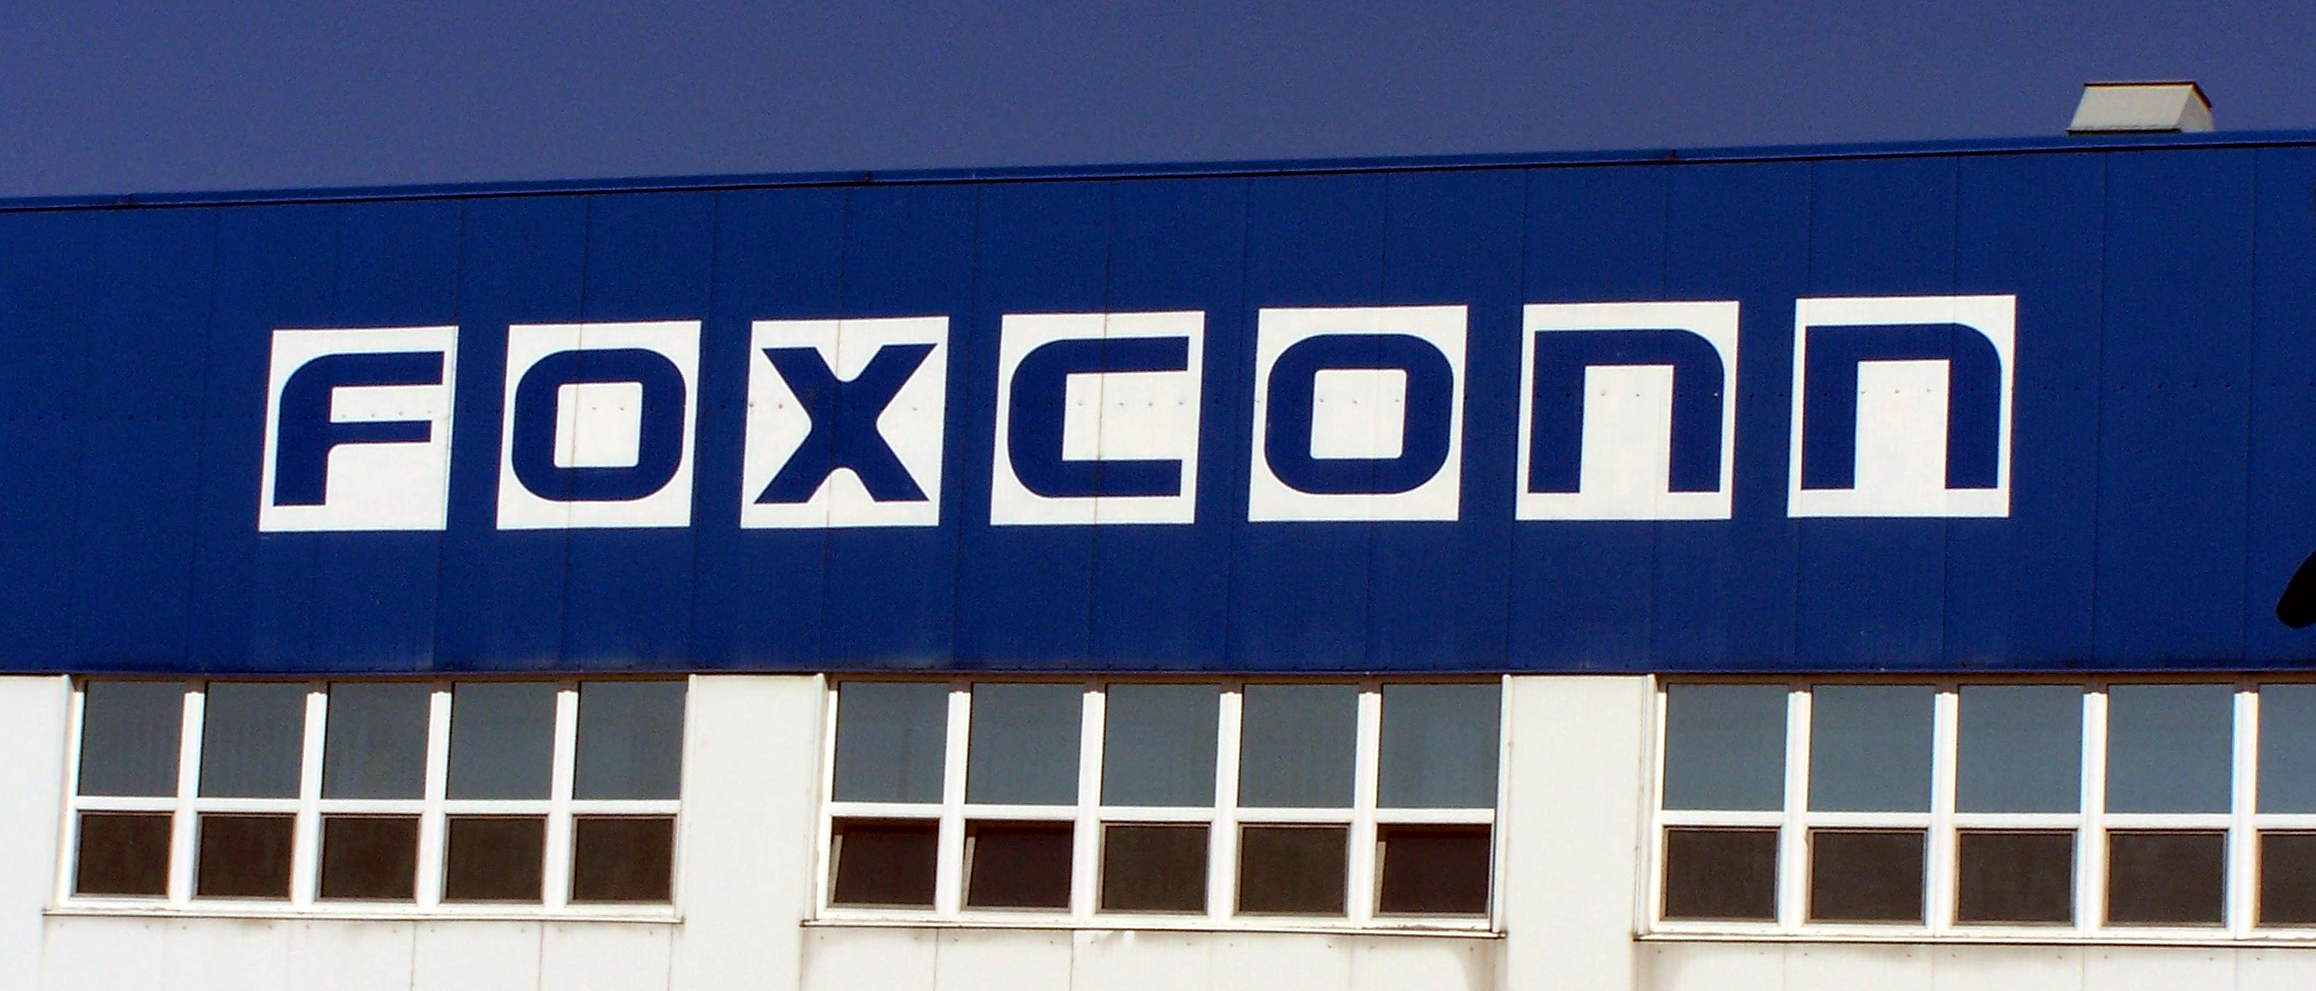 Huge Foxconn iPhone plant in China rocked by fresh worker unrest